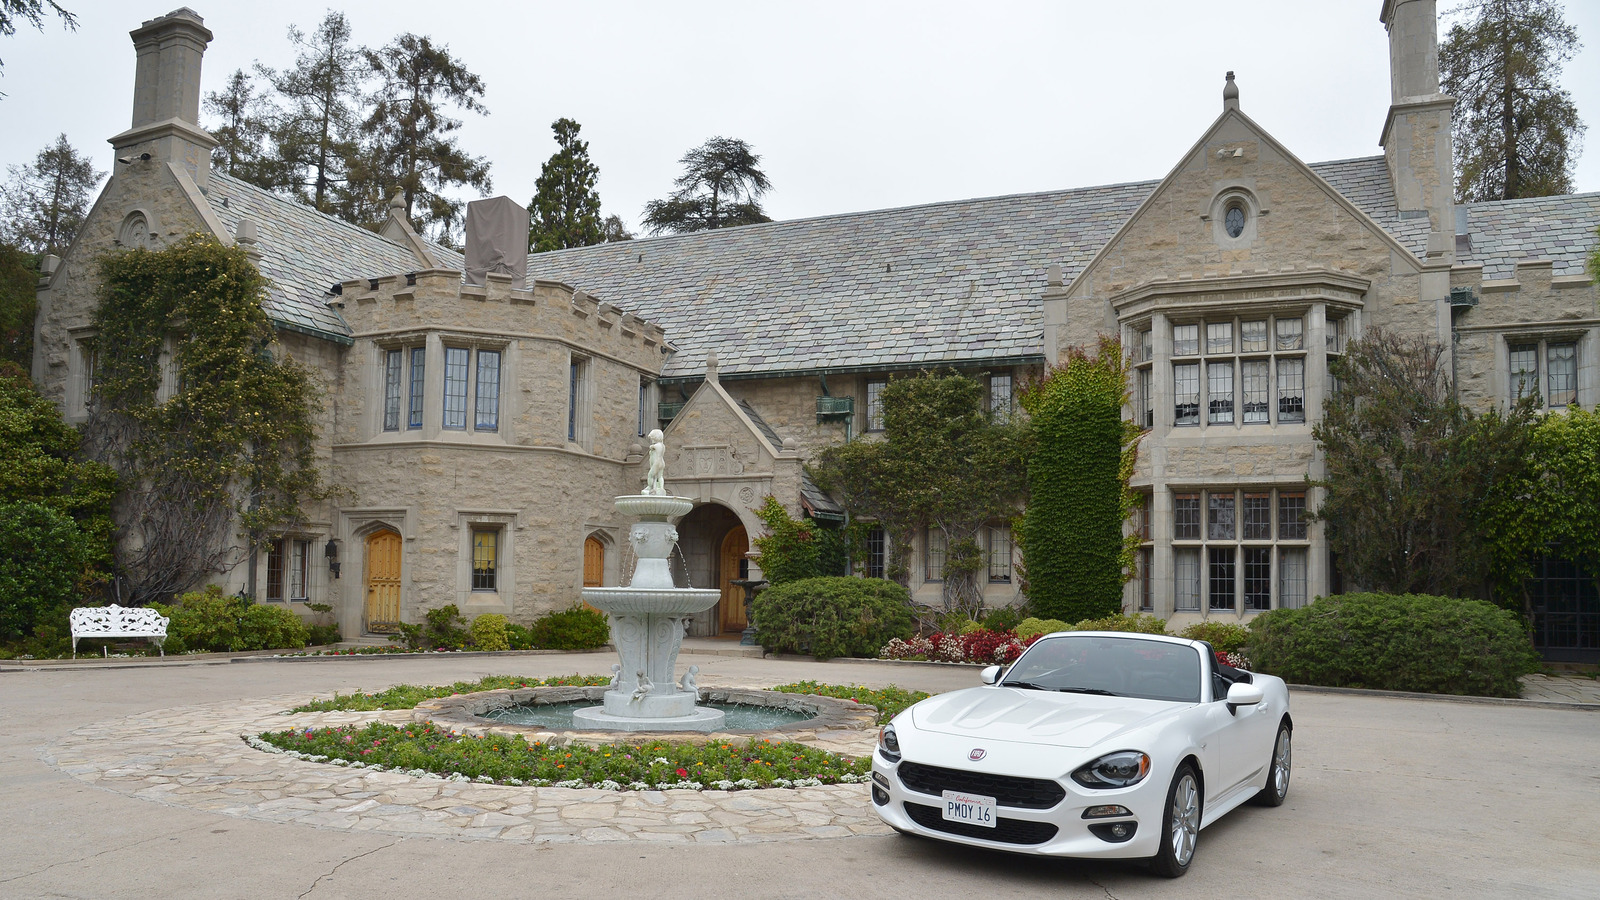 Playboy Mansion - Facts About The Playboy Mansion The Public Doesn't Know